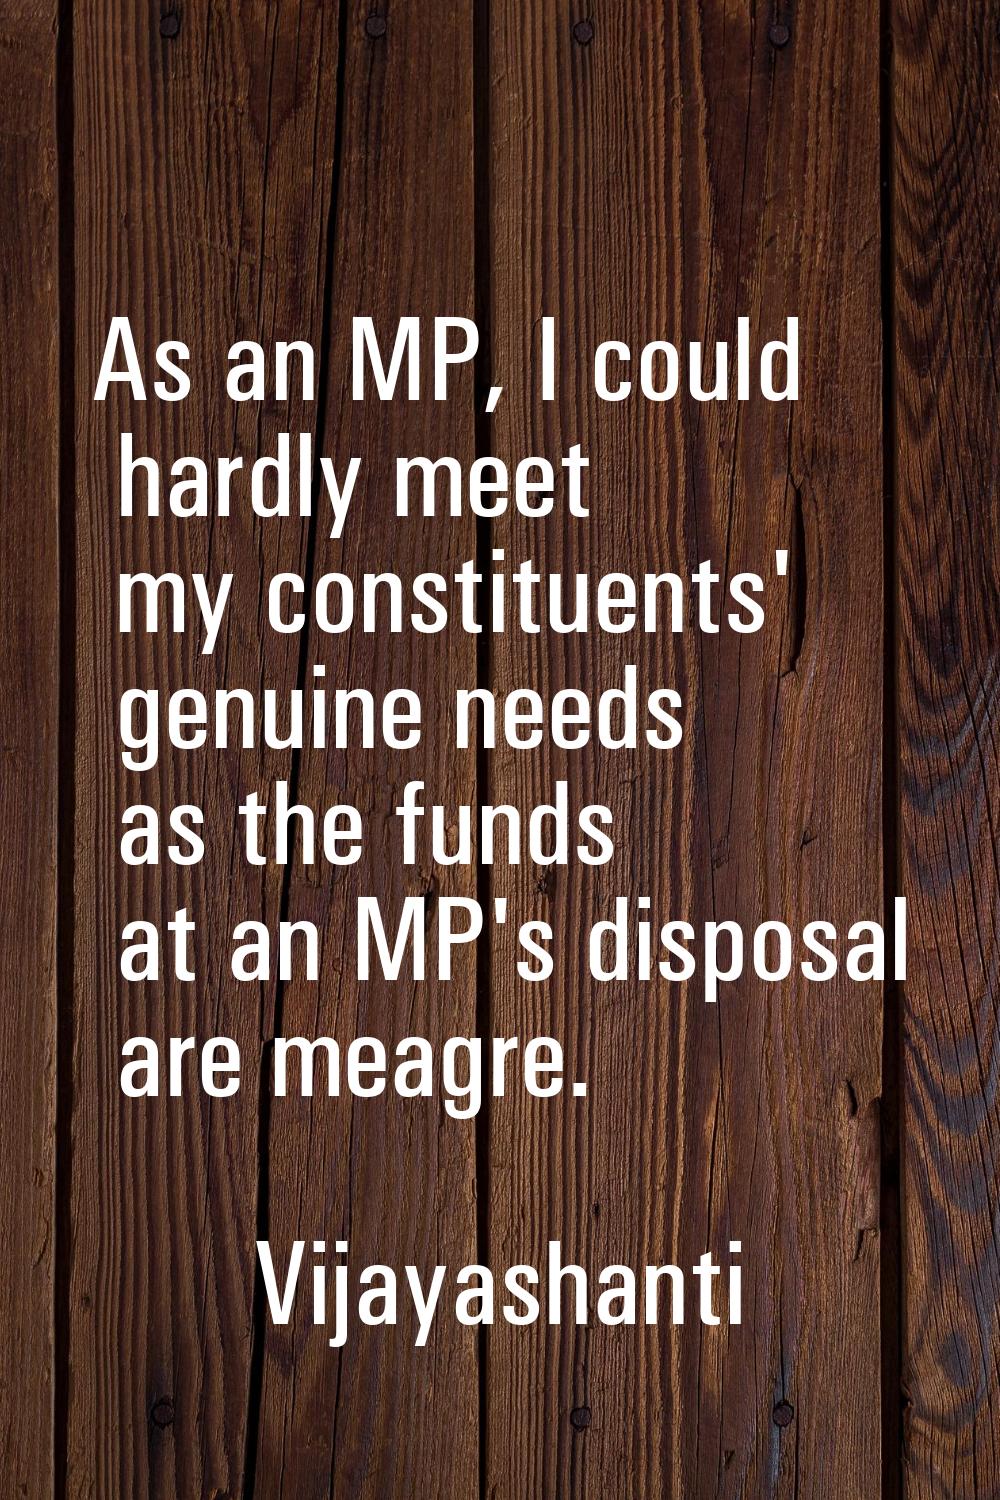 As an MP, I could hardly meet my constituents' genuine needs as the funds at an MP's disposal are m